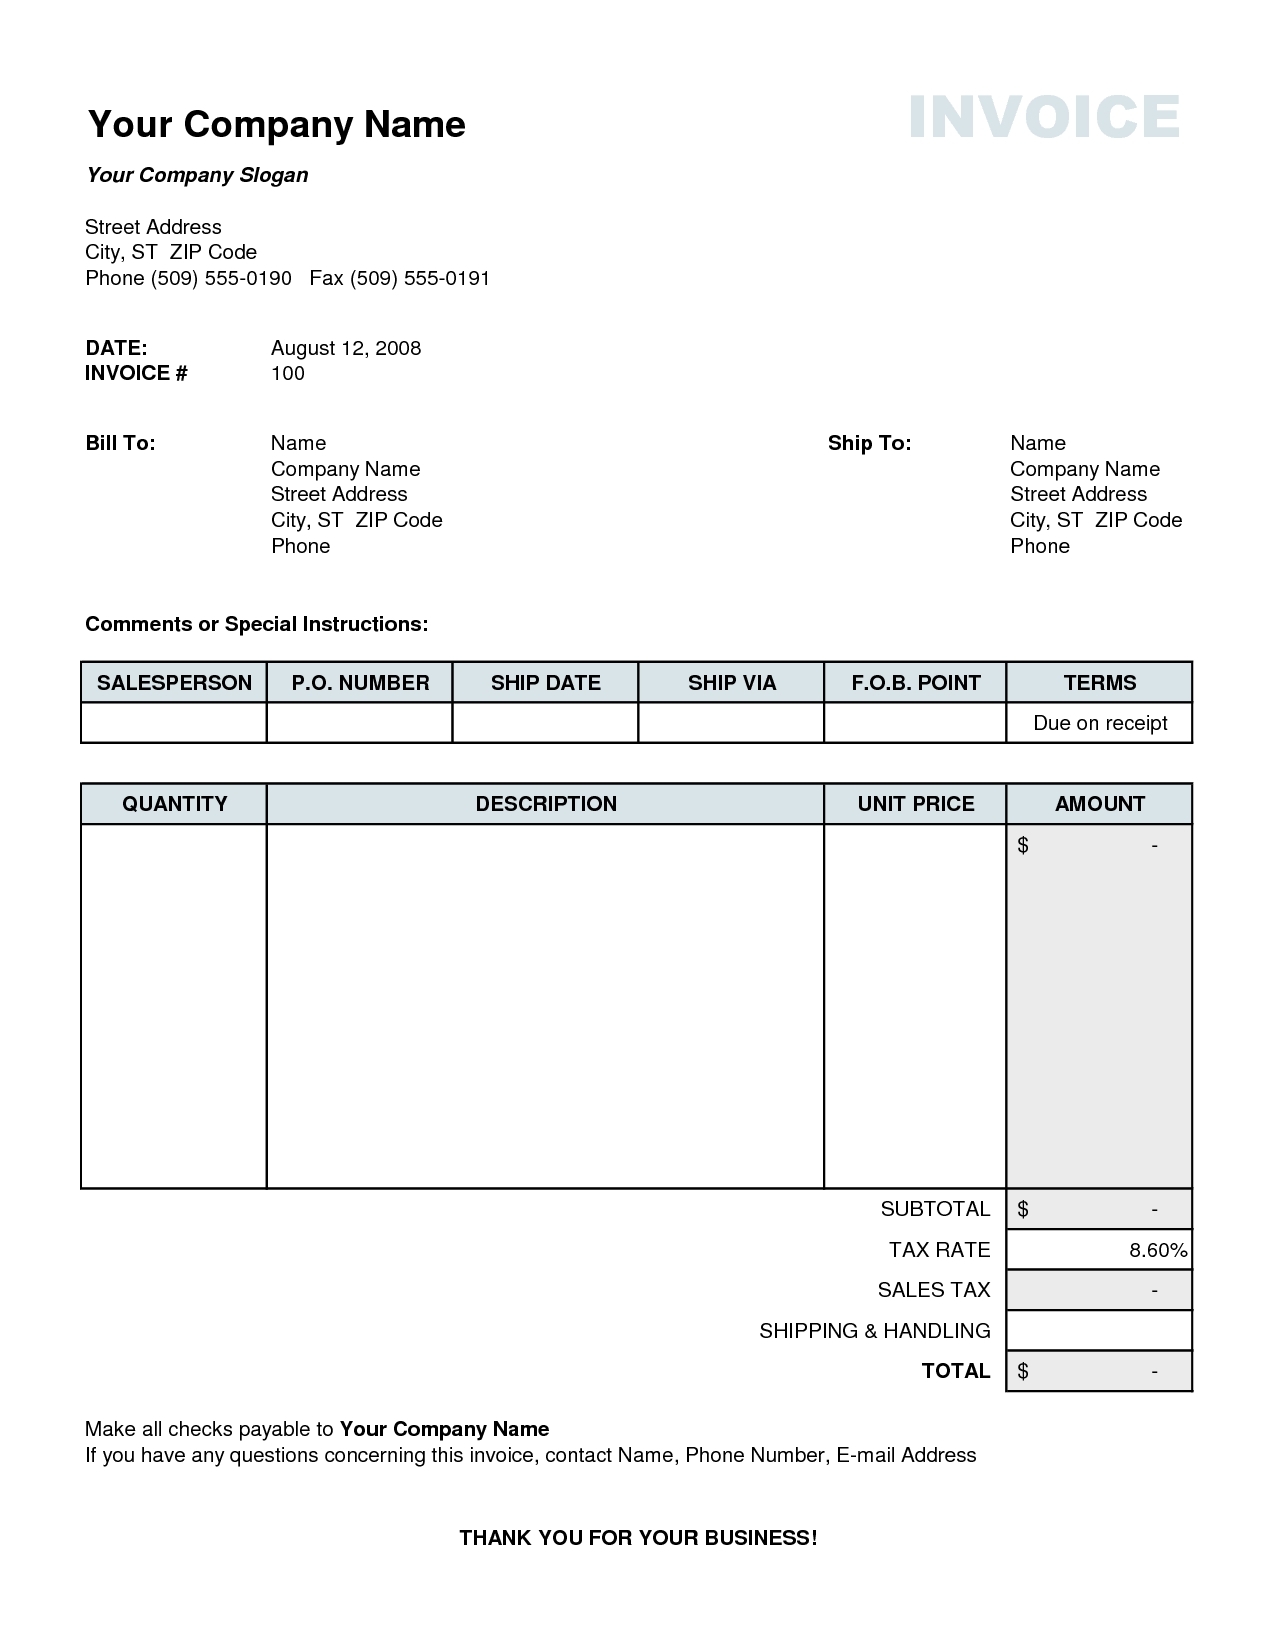 excel tax invoice template invoice template free 2016 sample tax invoice excel